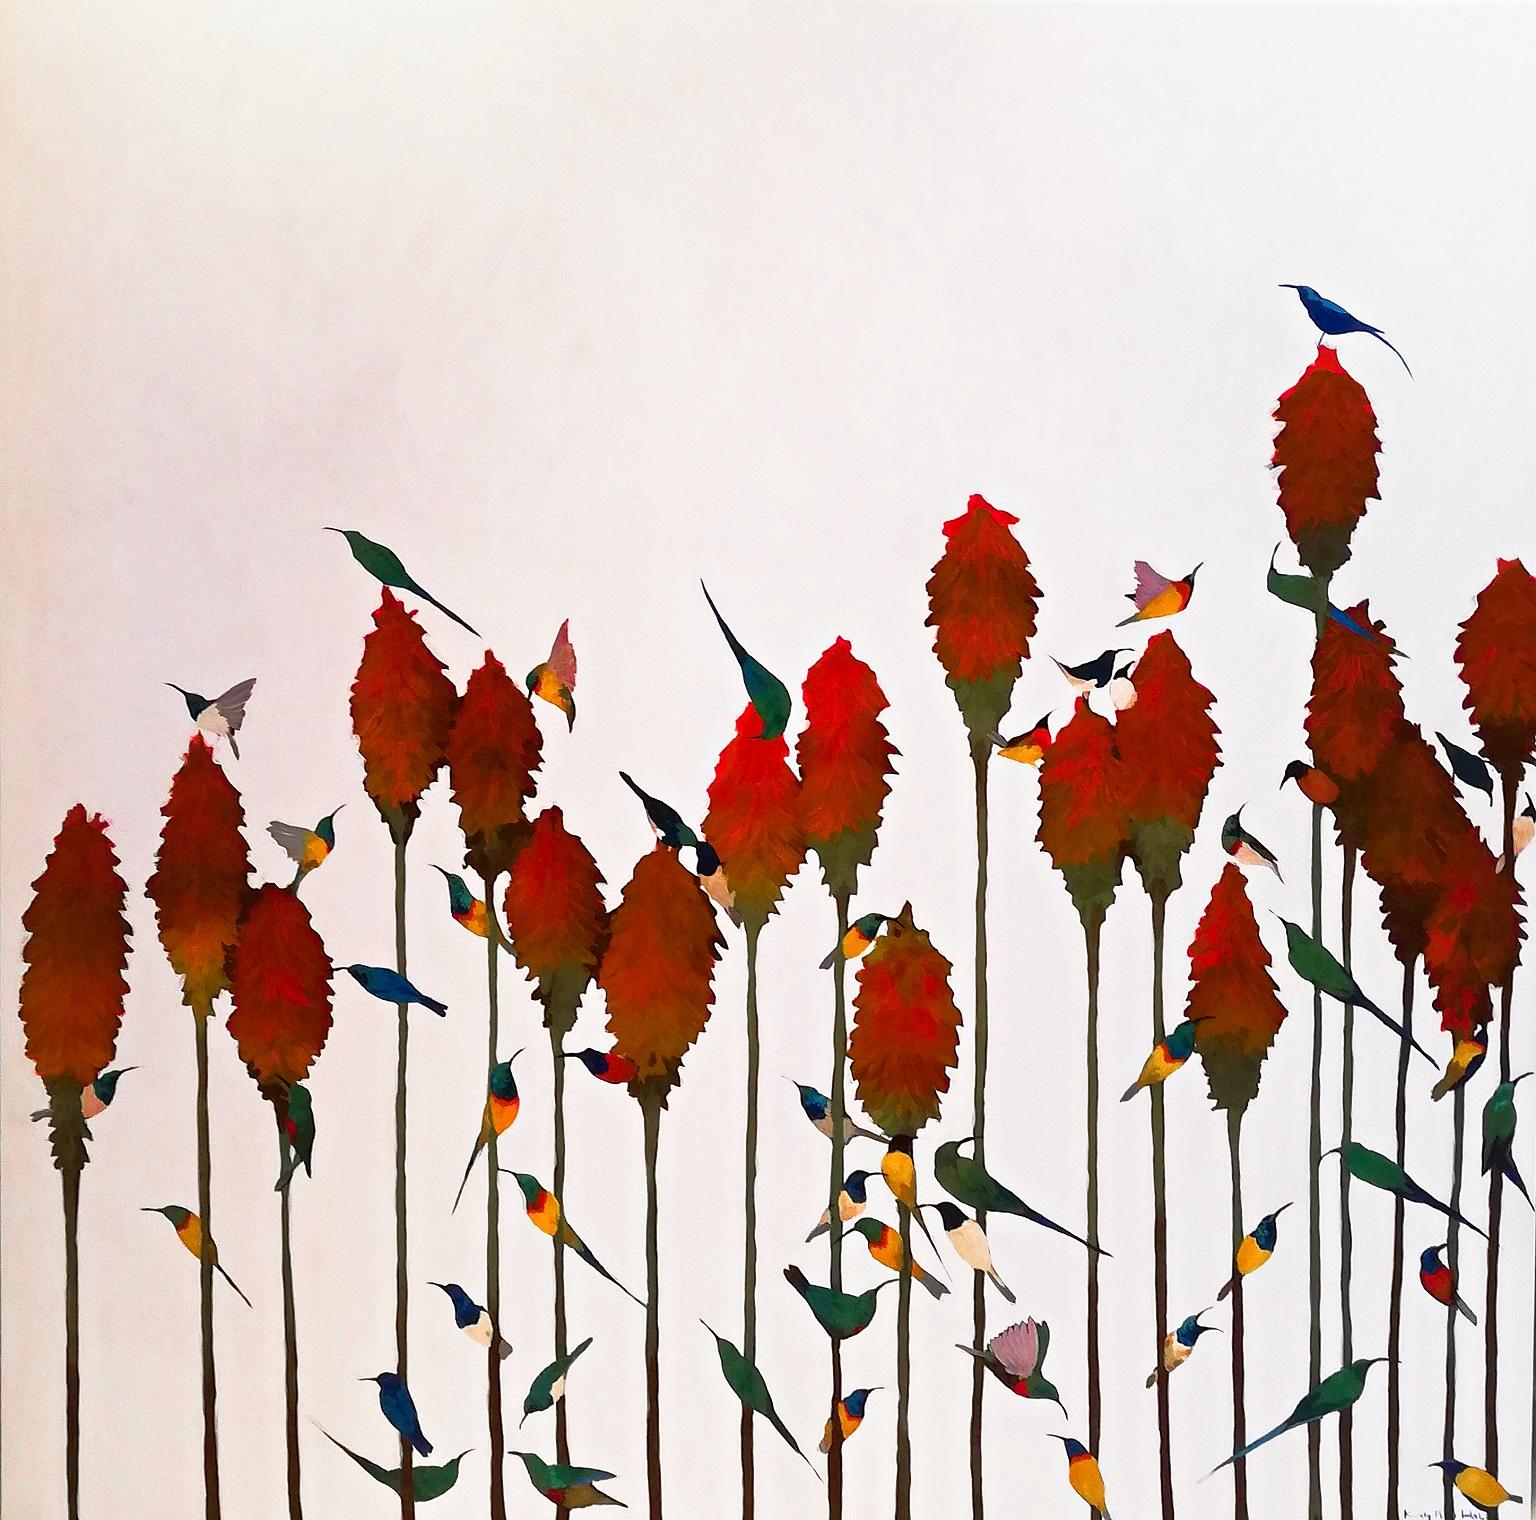 Kirsty May Hall Animal Painting - Sunbirds & Aloes - Contemporary, Acrylic on canvas laid on board, 21st Century